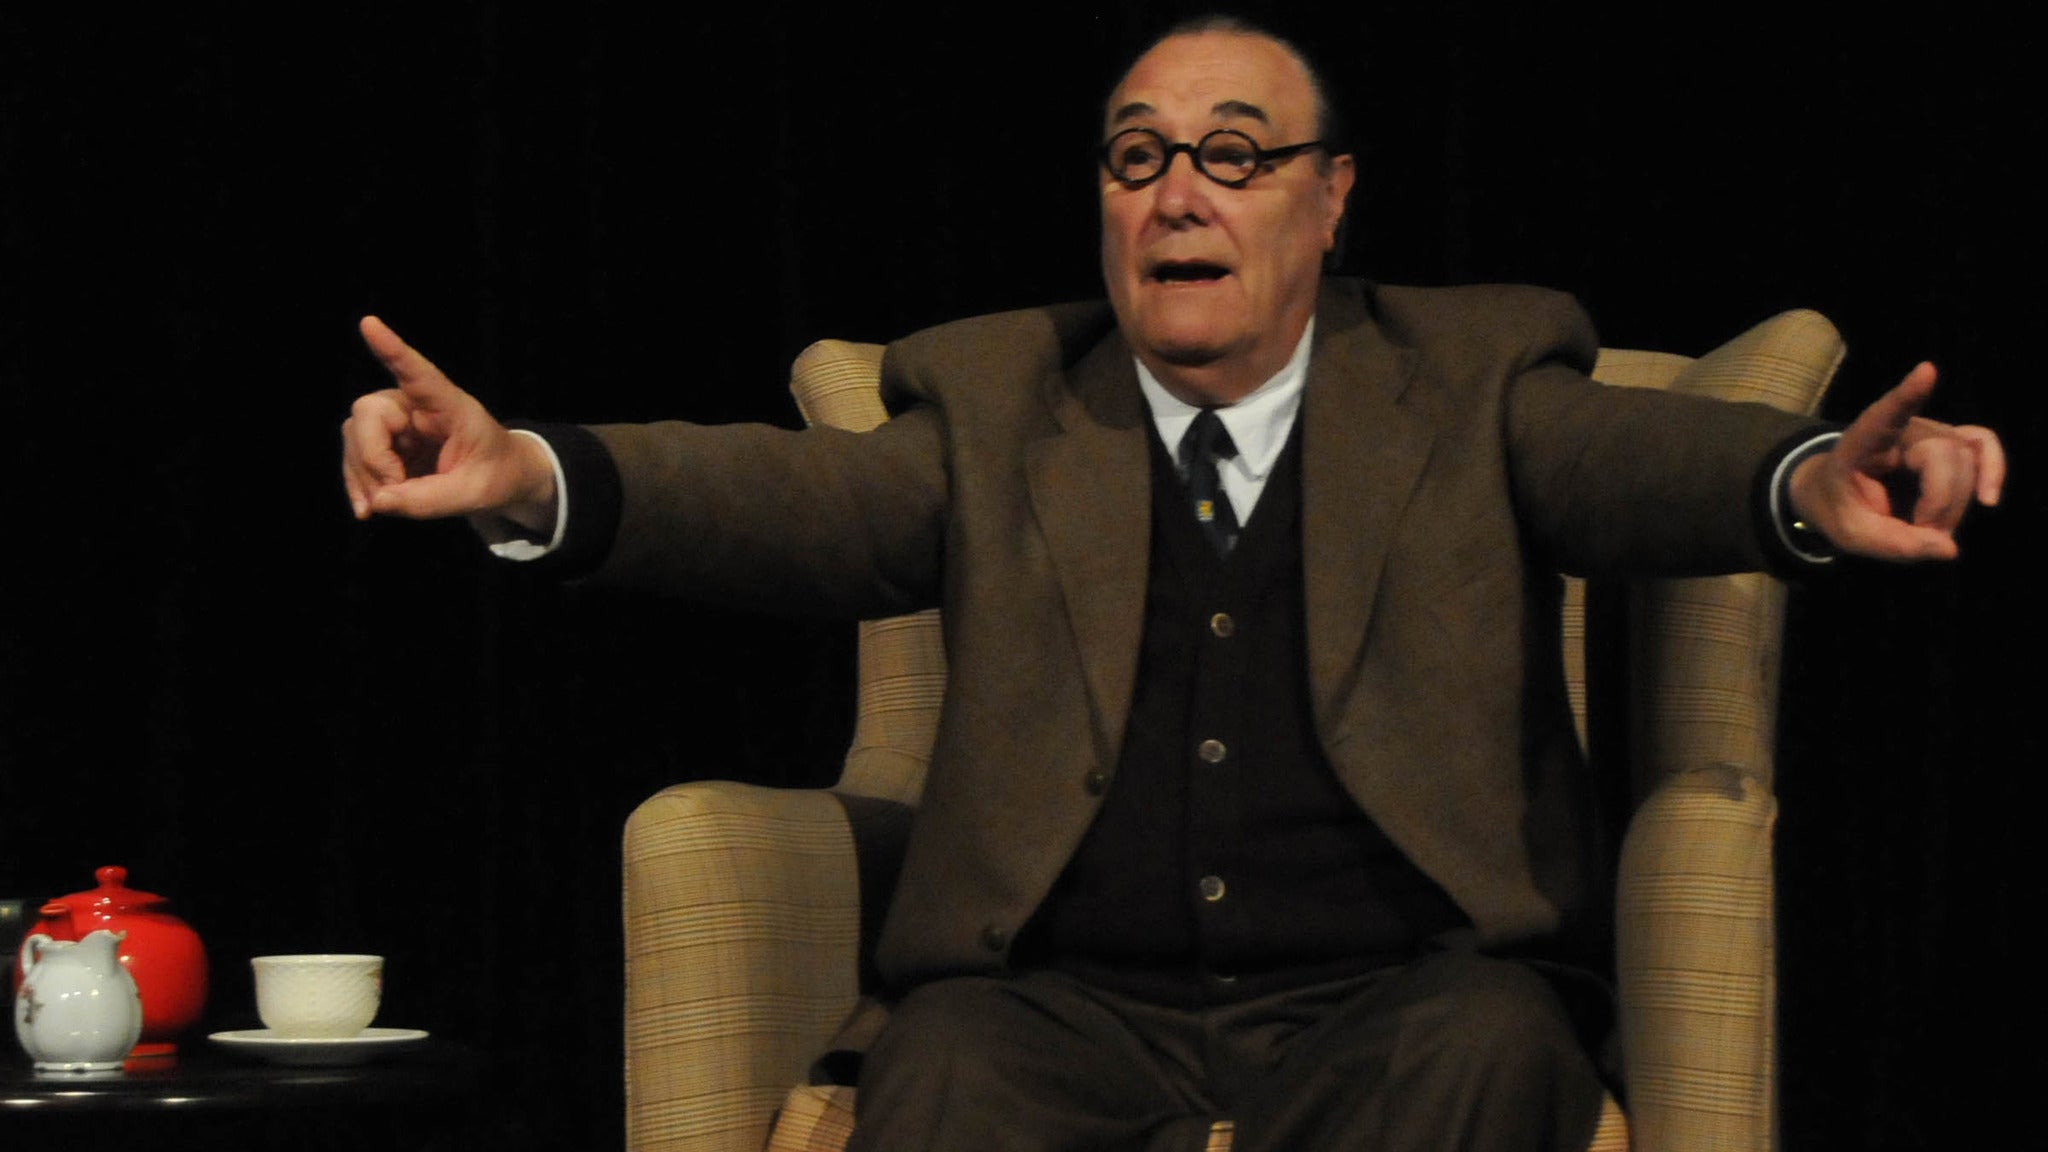 My Life's Journey An Evening With C.S. Lewis in Burnsville promo photo for Venue presale offer code